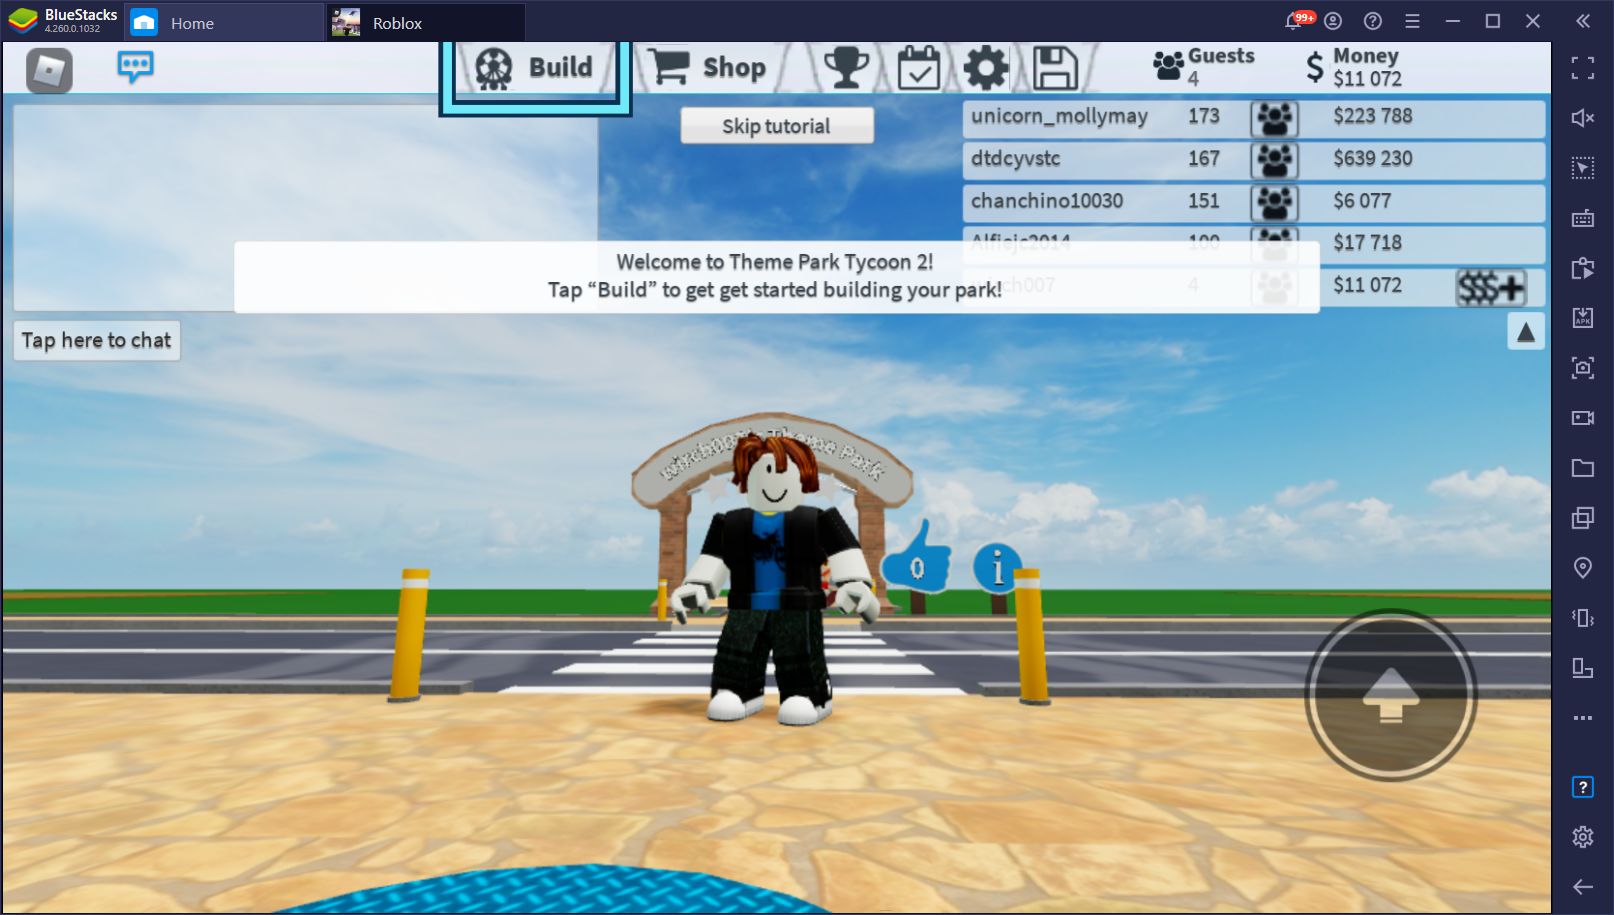 The Best Roblox Games To Play In 2021 Bluestacks - roblox youtube tycoon games